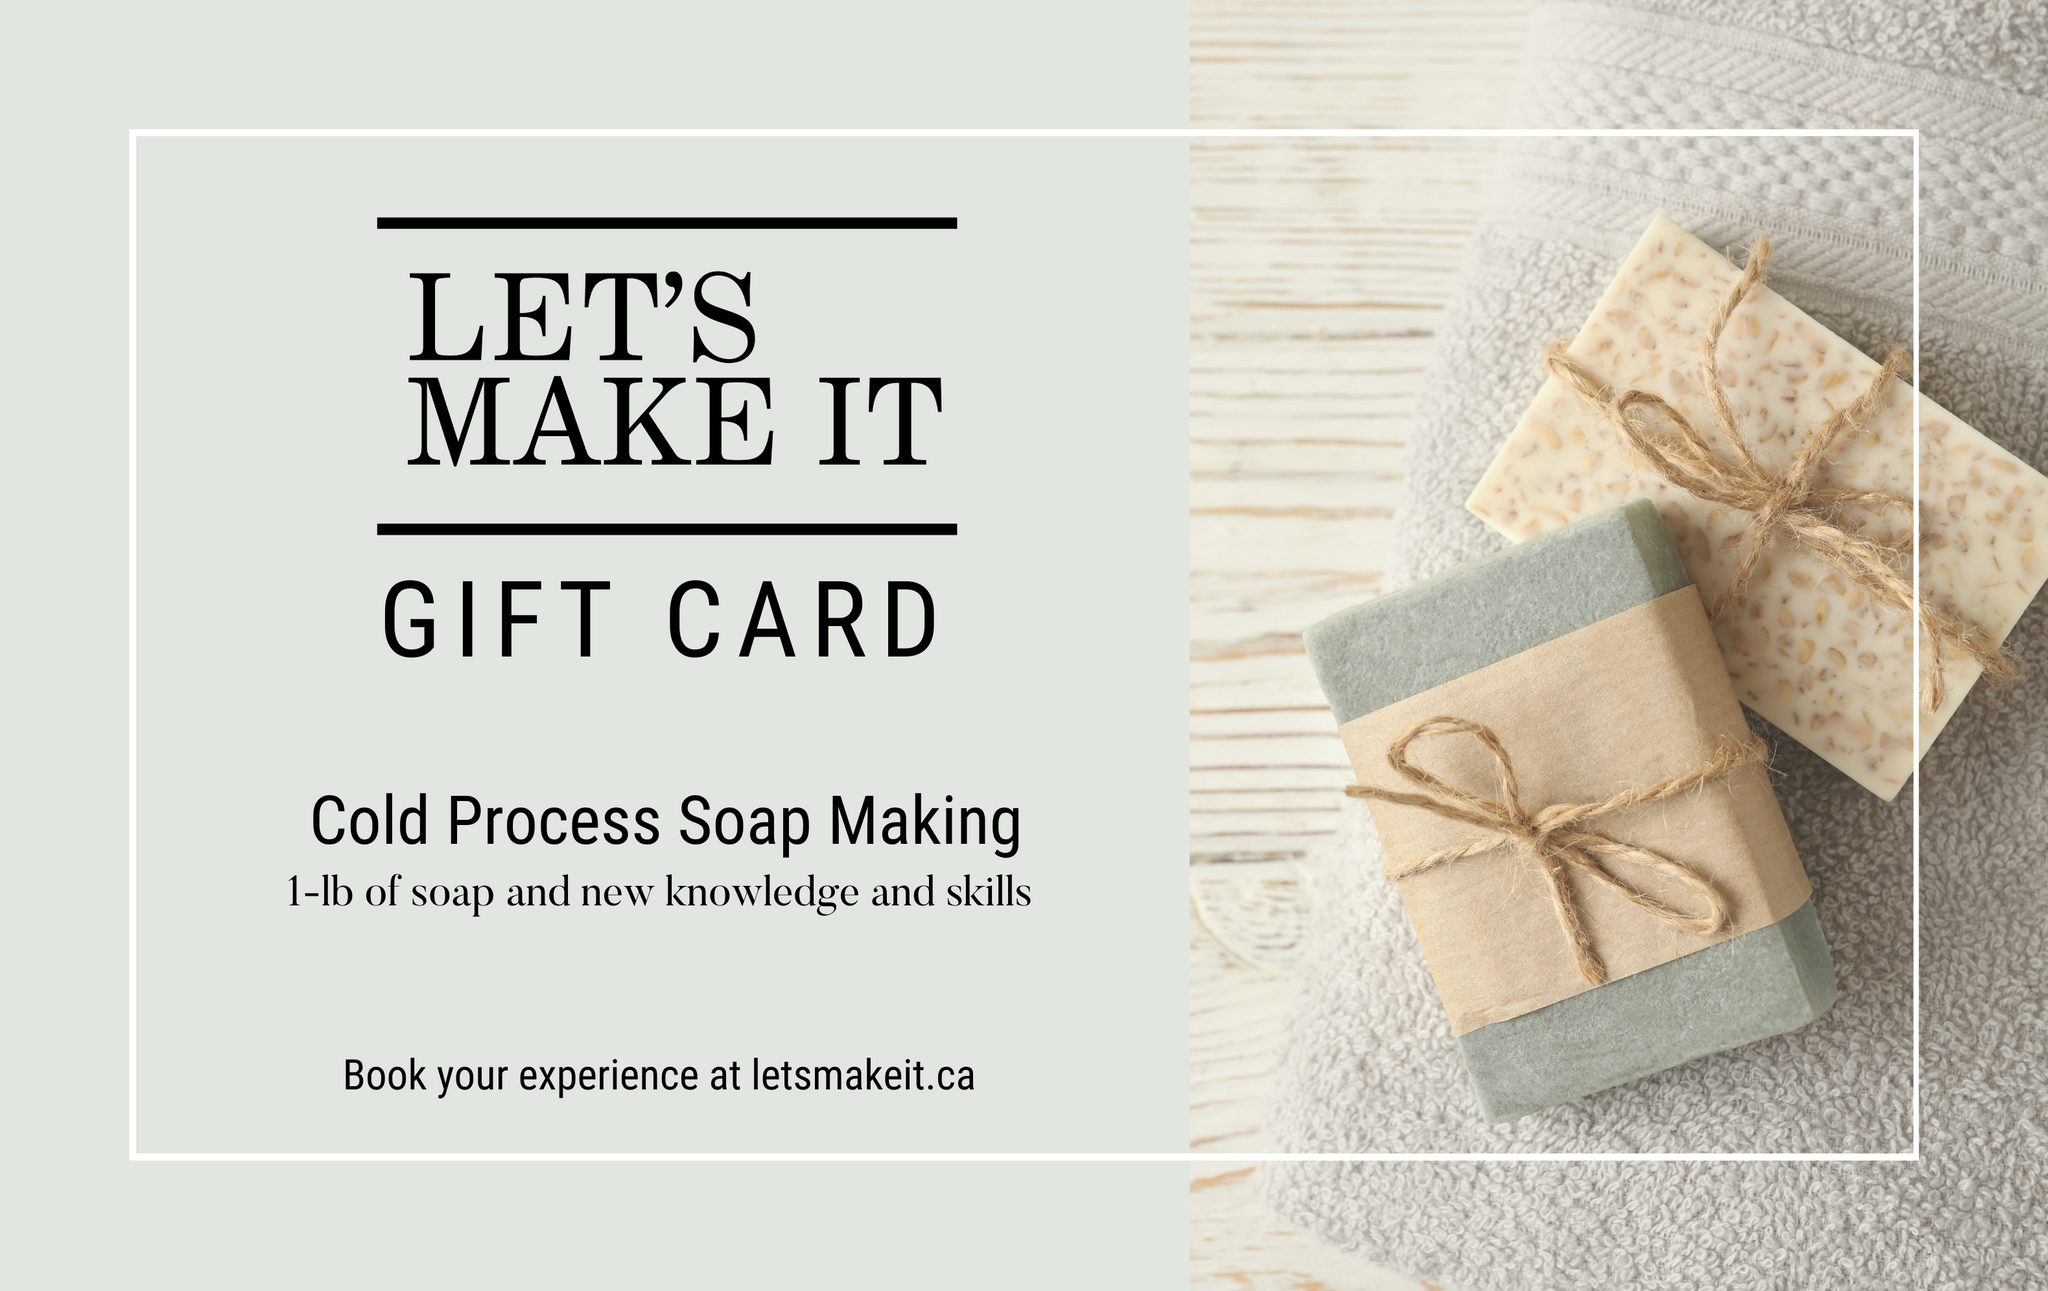 Cold Process Soap Making Gift Card